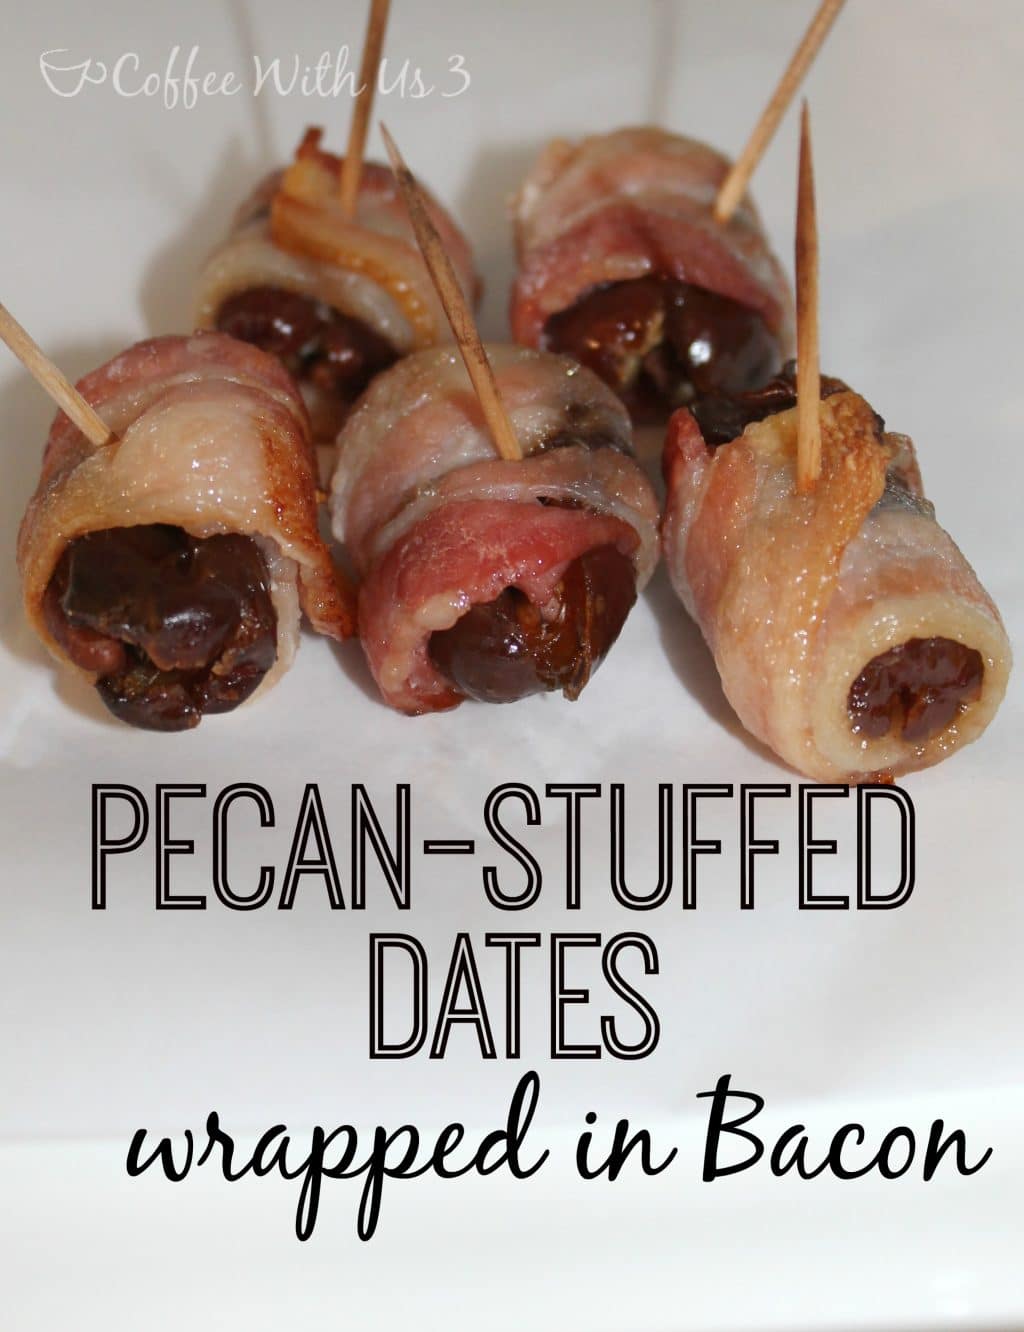 Pecan-stuffed Dates wrapped in Bacon